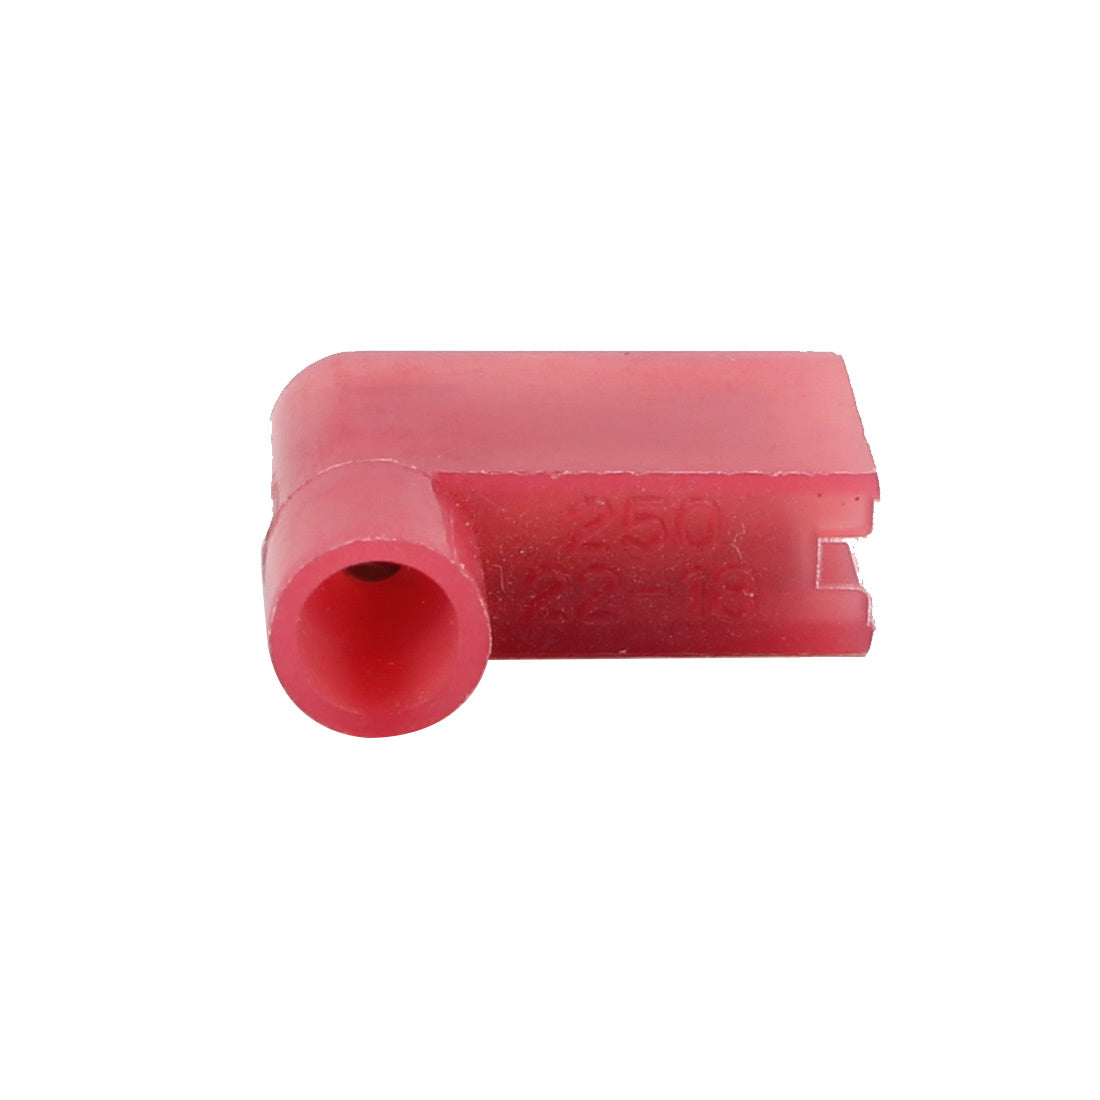 uxcell Uxcell 5Pcs Flag Crimp Terminals Female Nylon Fully Insulated Wire Connectors Red